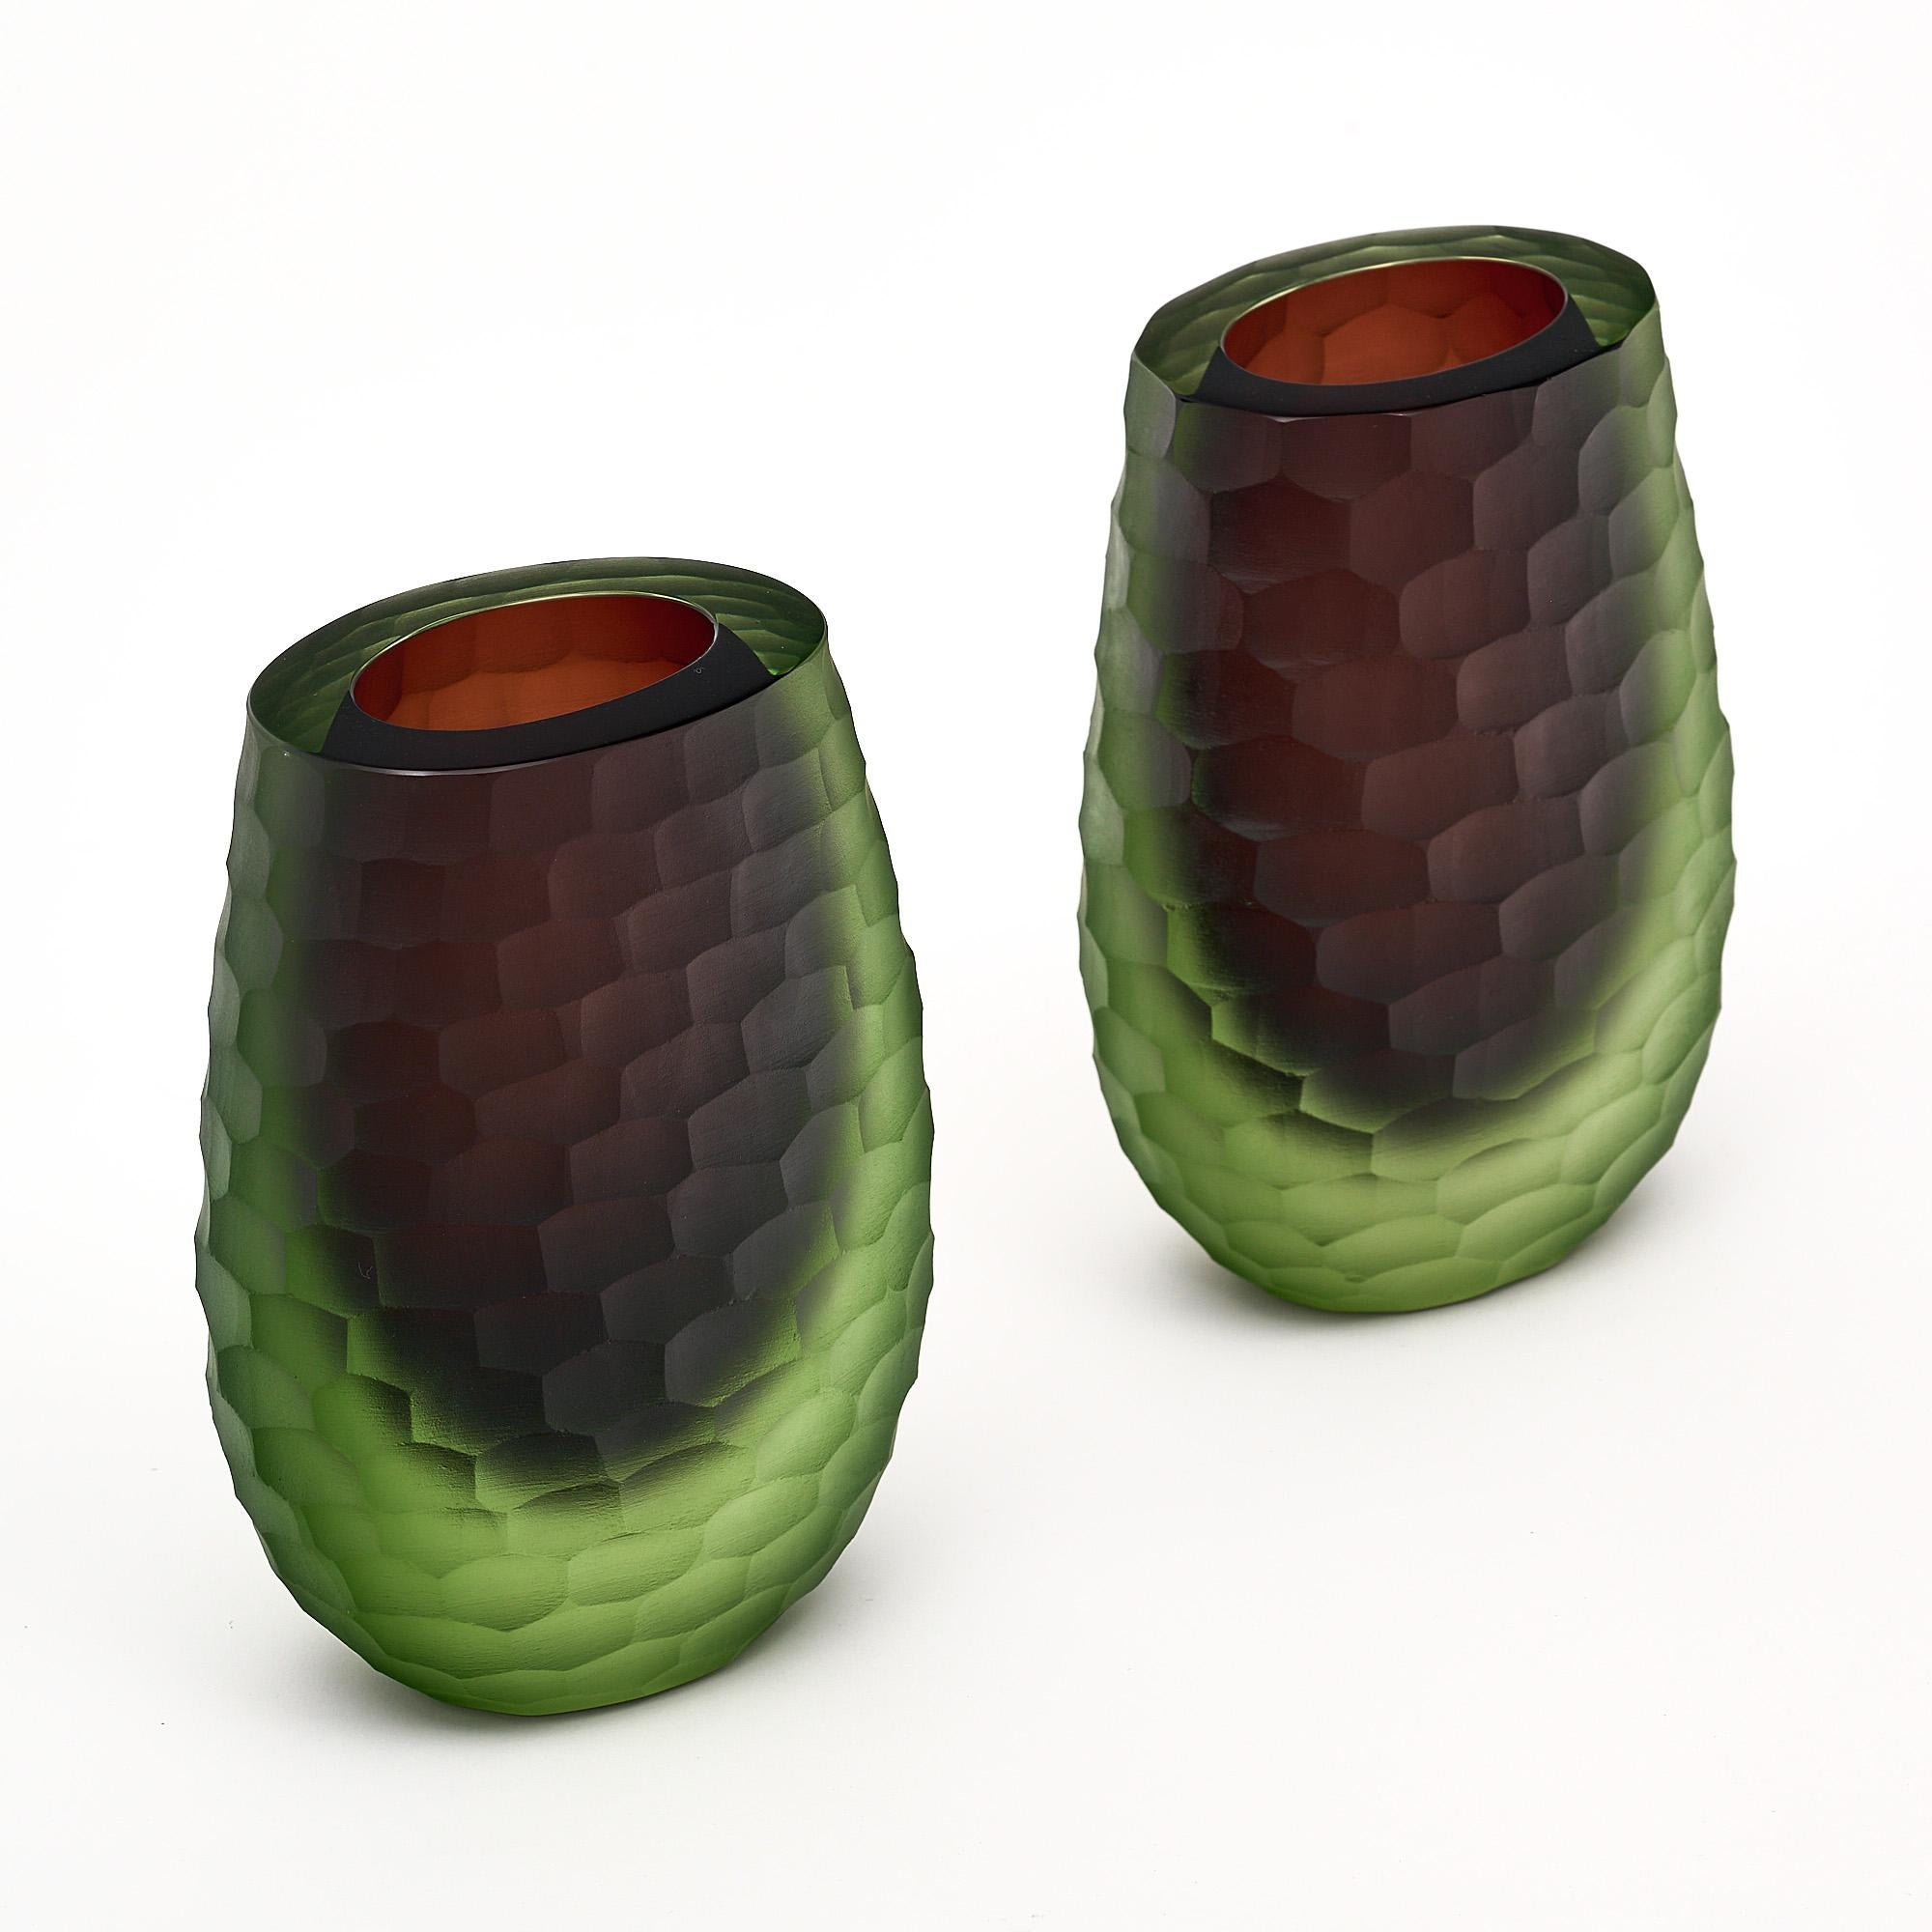 Pair of vases, Italian, from the Island of Murano. This pair is hand-crafted by combining the “Sommerso” technique and the Ferro Battuto technique, originally initiated by iconic designer Ettore Sottsass. We love the thickness of the glass and the